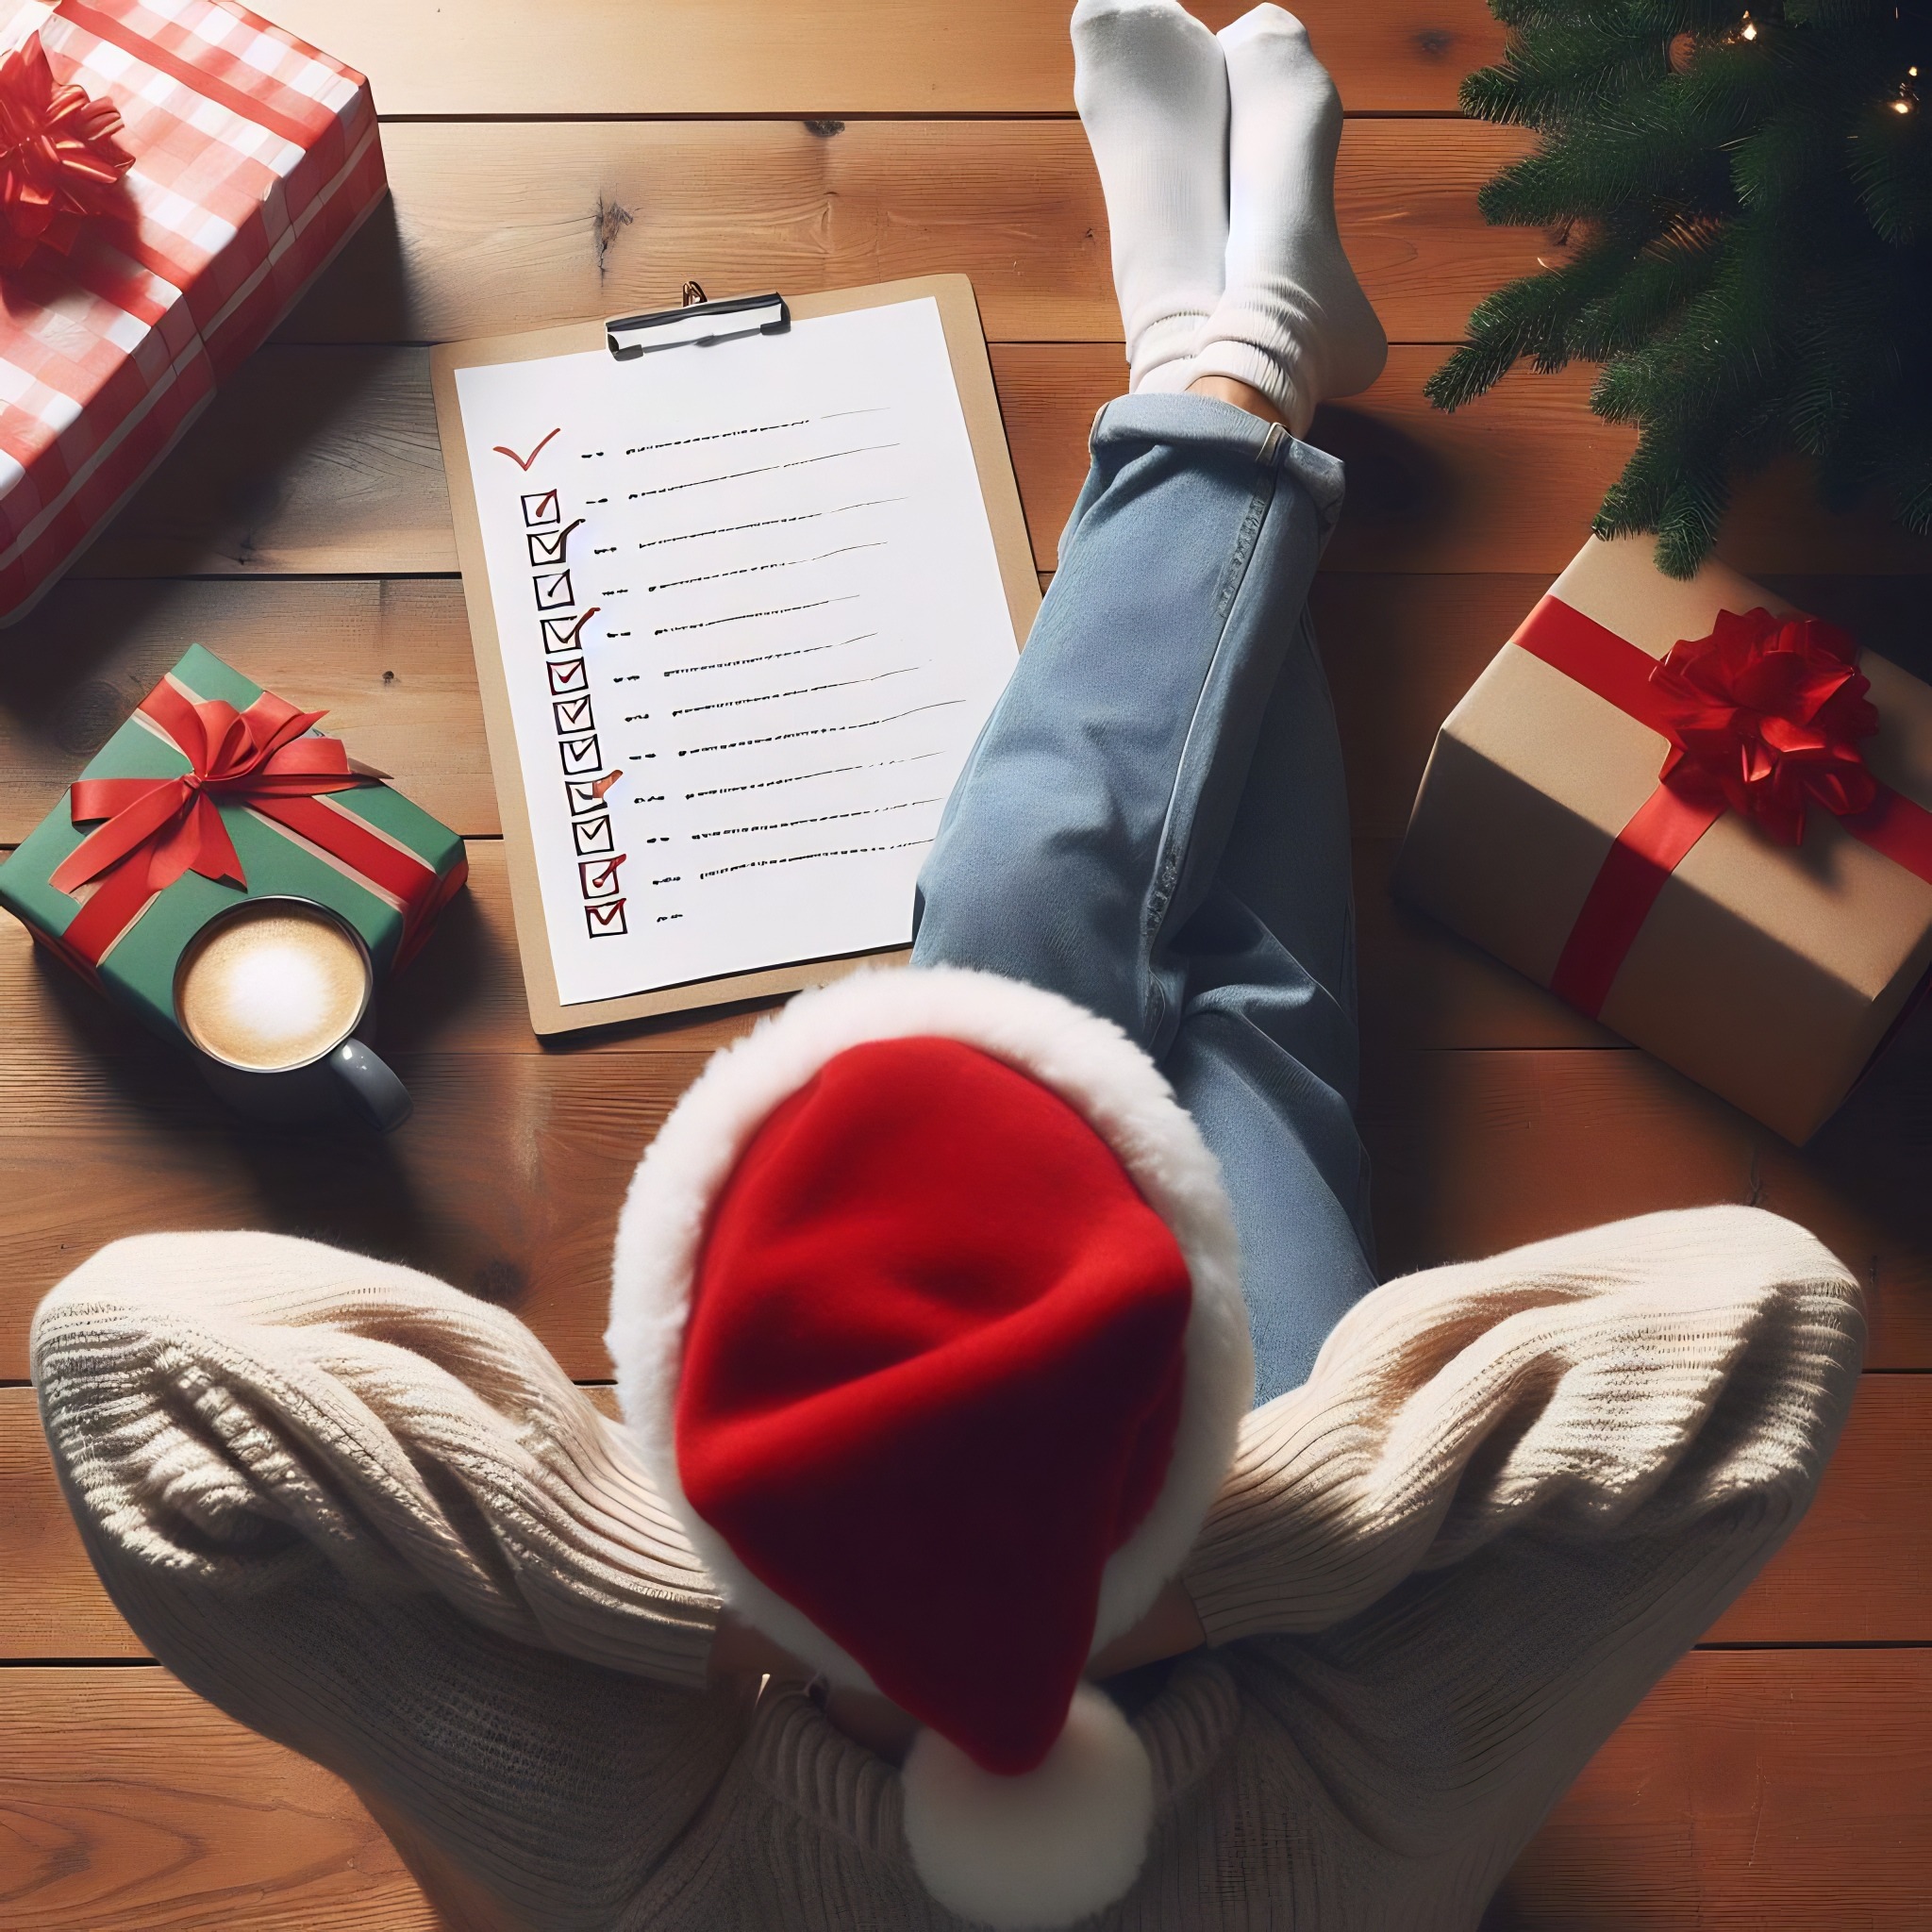 Don’t Be a Grinch: Relax Your Way Through Christmas Shopping